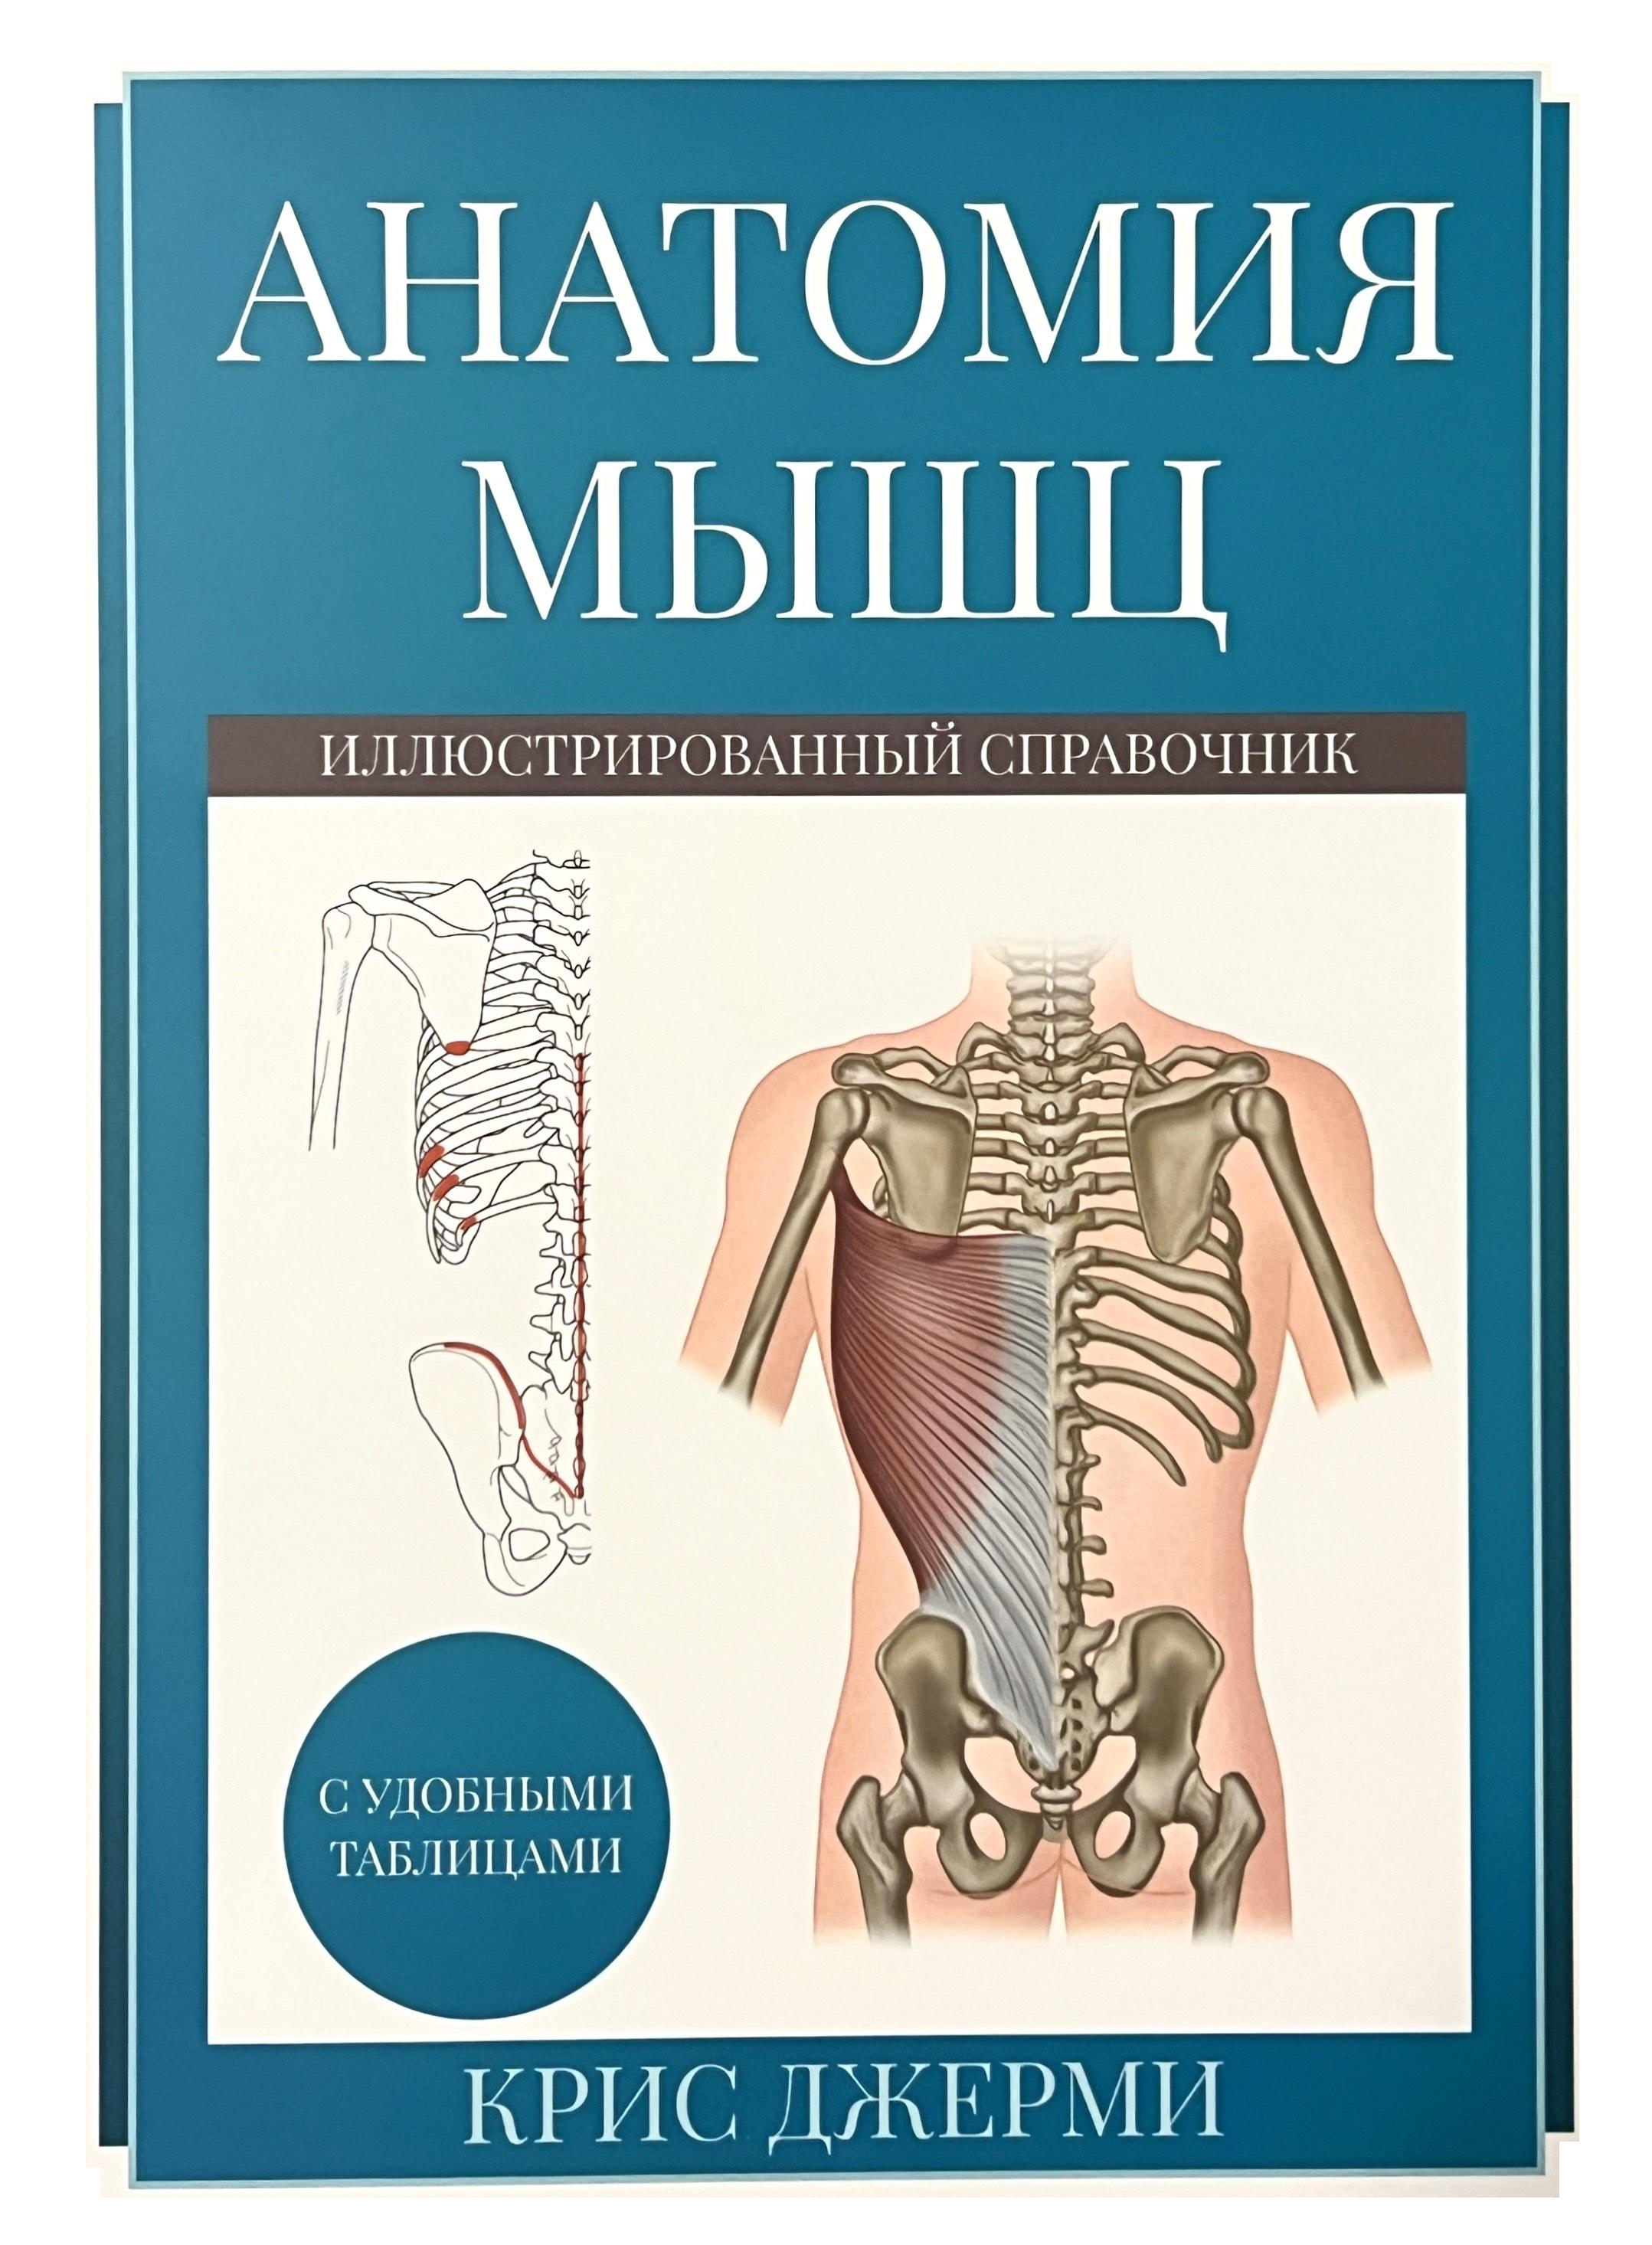 Anatomy of muscles. Illustrated reference book